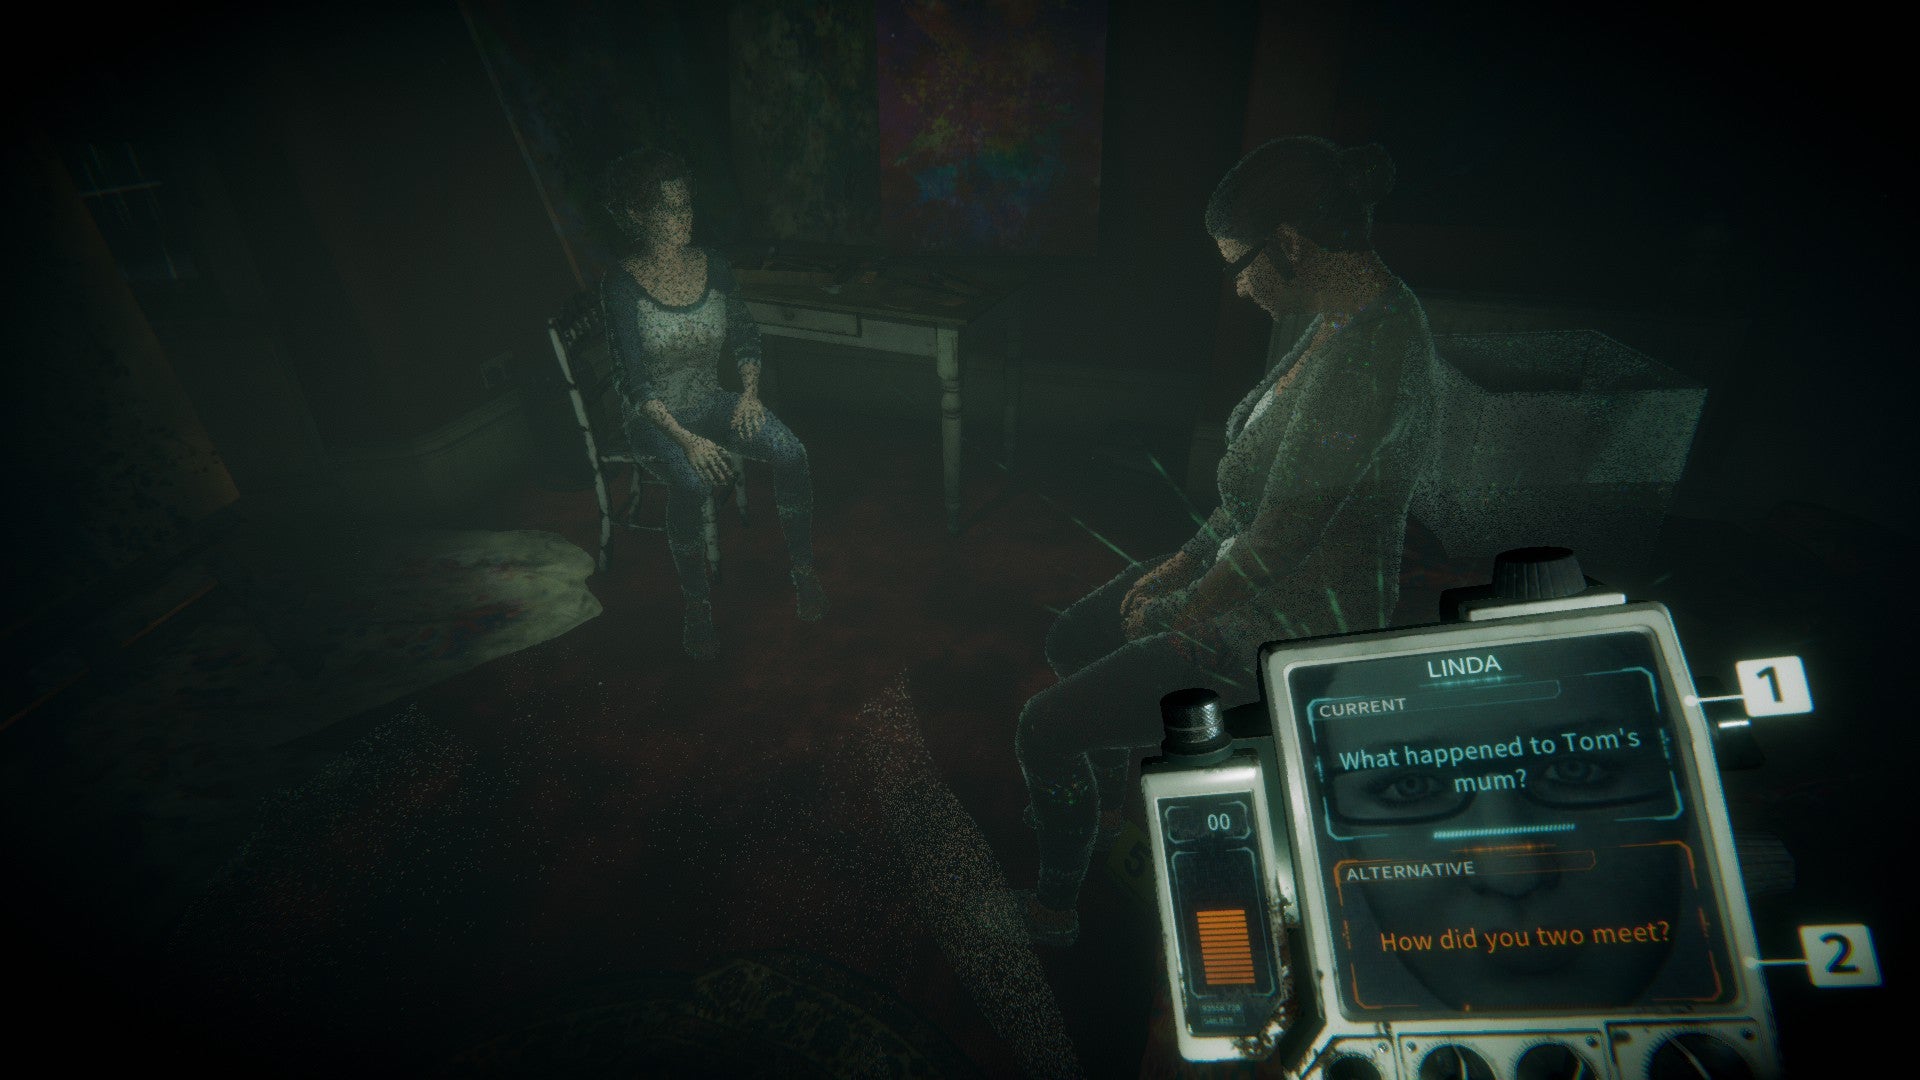 Eternal Threads Review - Handheld Scanner, You Can See Two Seated Characters Conversing